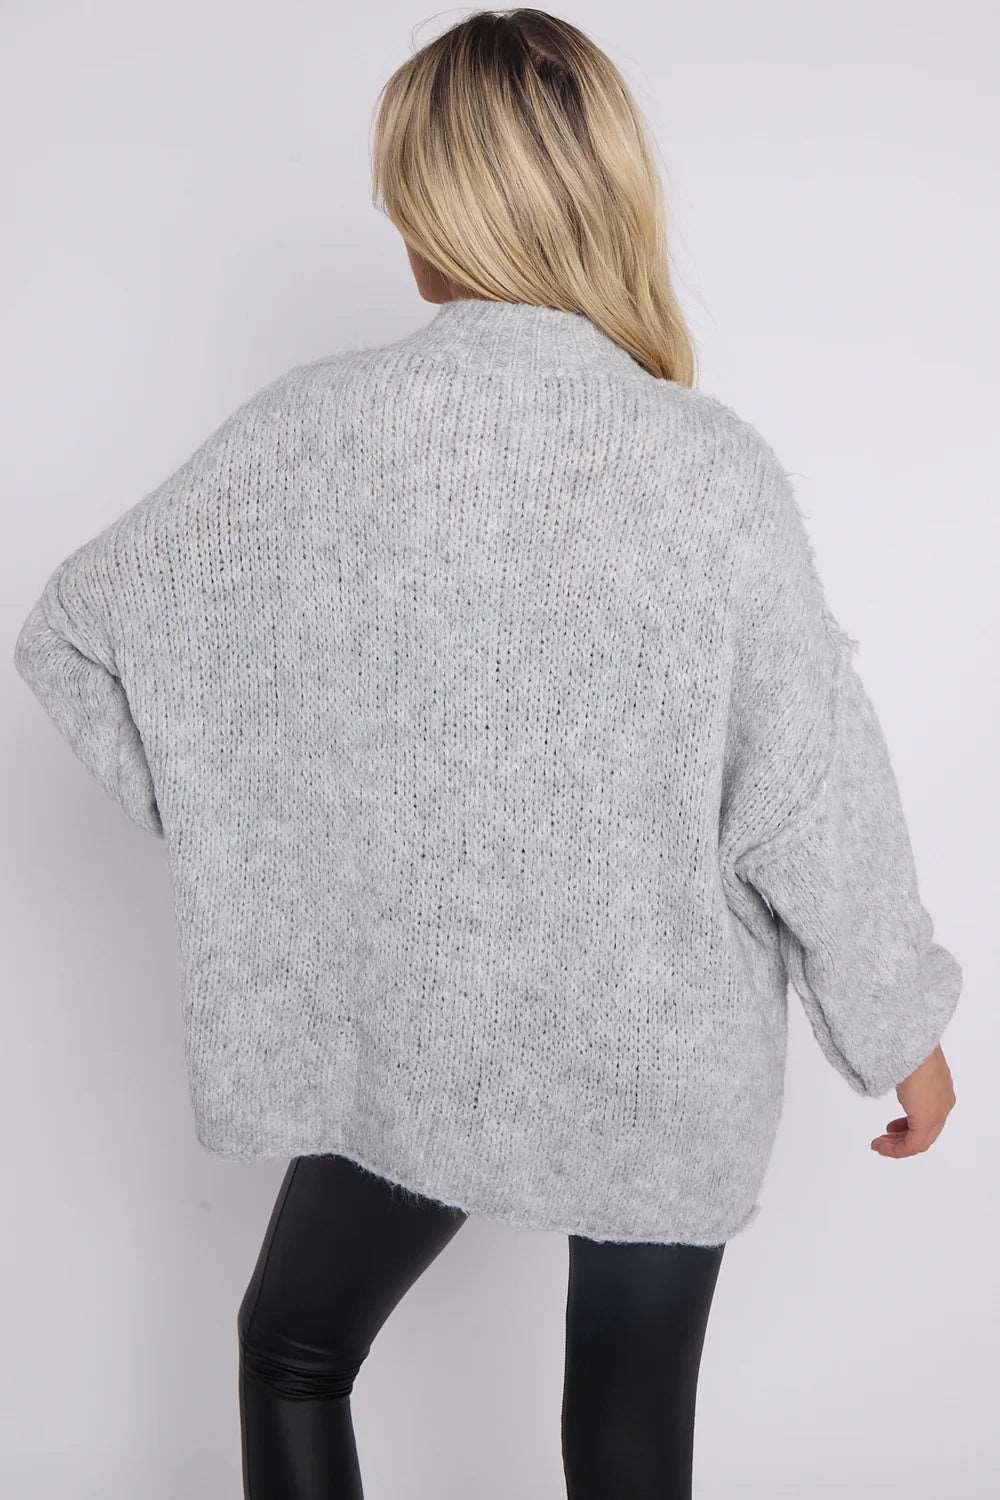 Calista Button Detail Bubble Sleeve Women Jumper UK | Grey Color | Available in Sizes 8-16